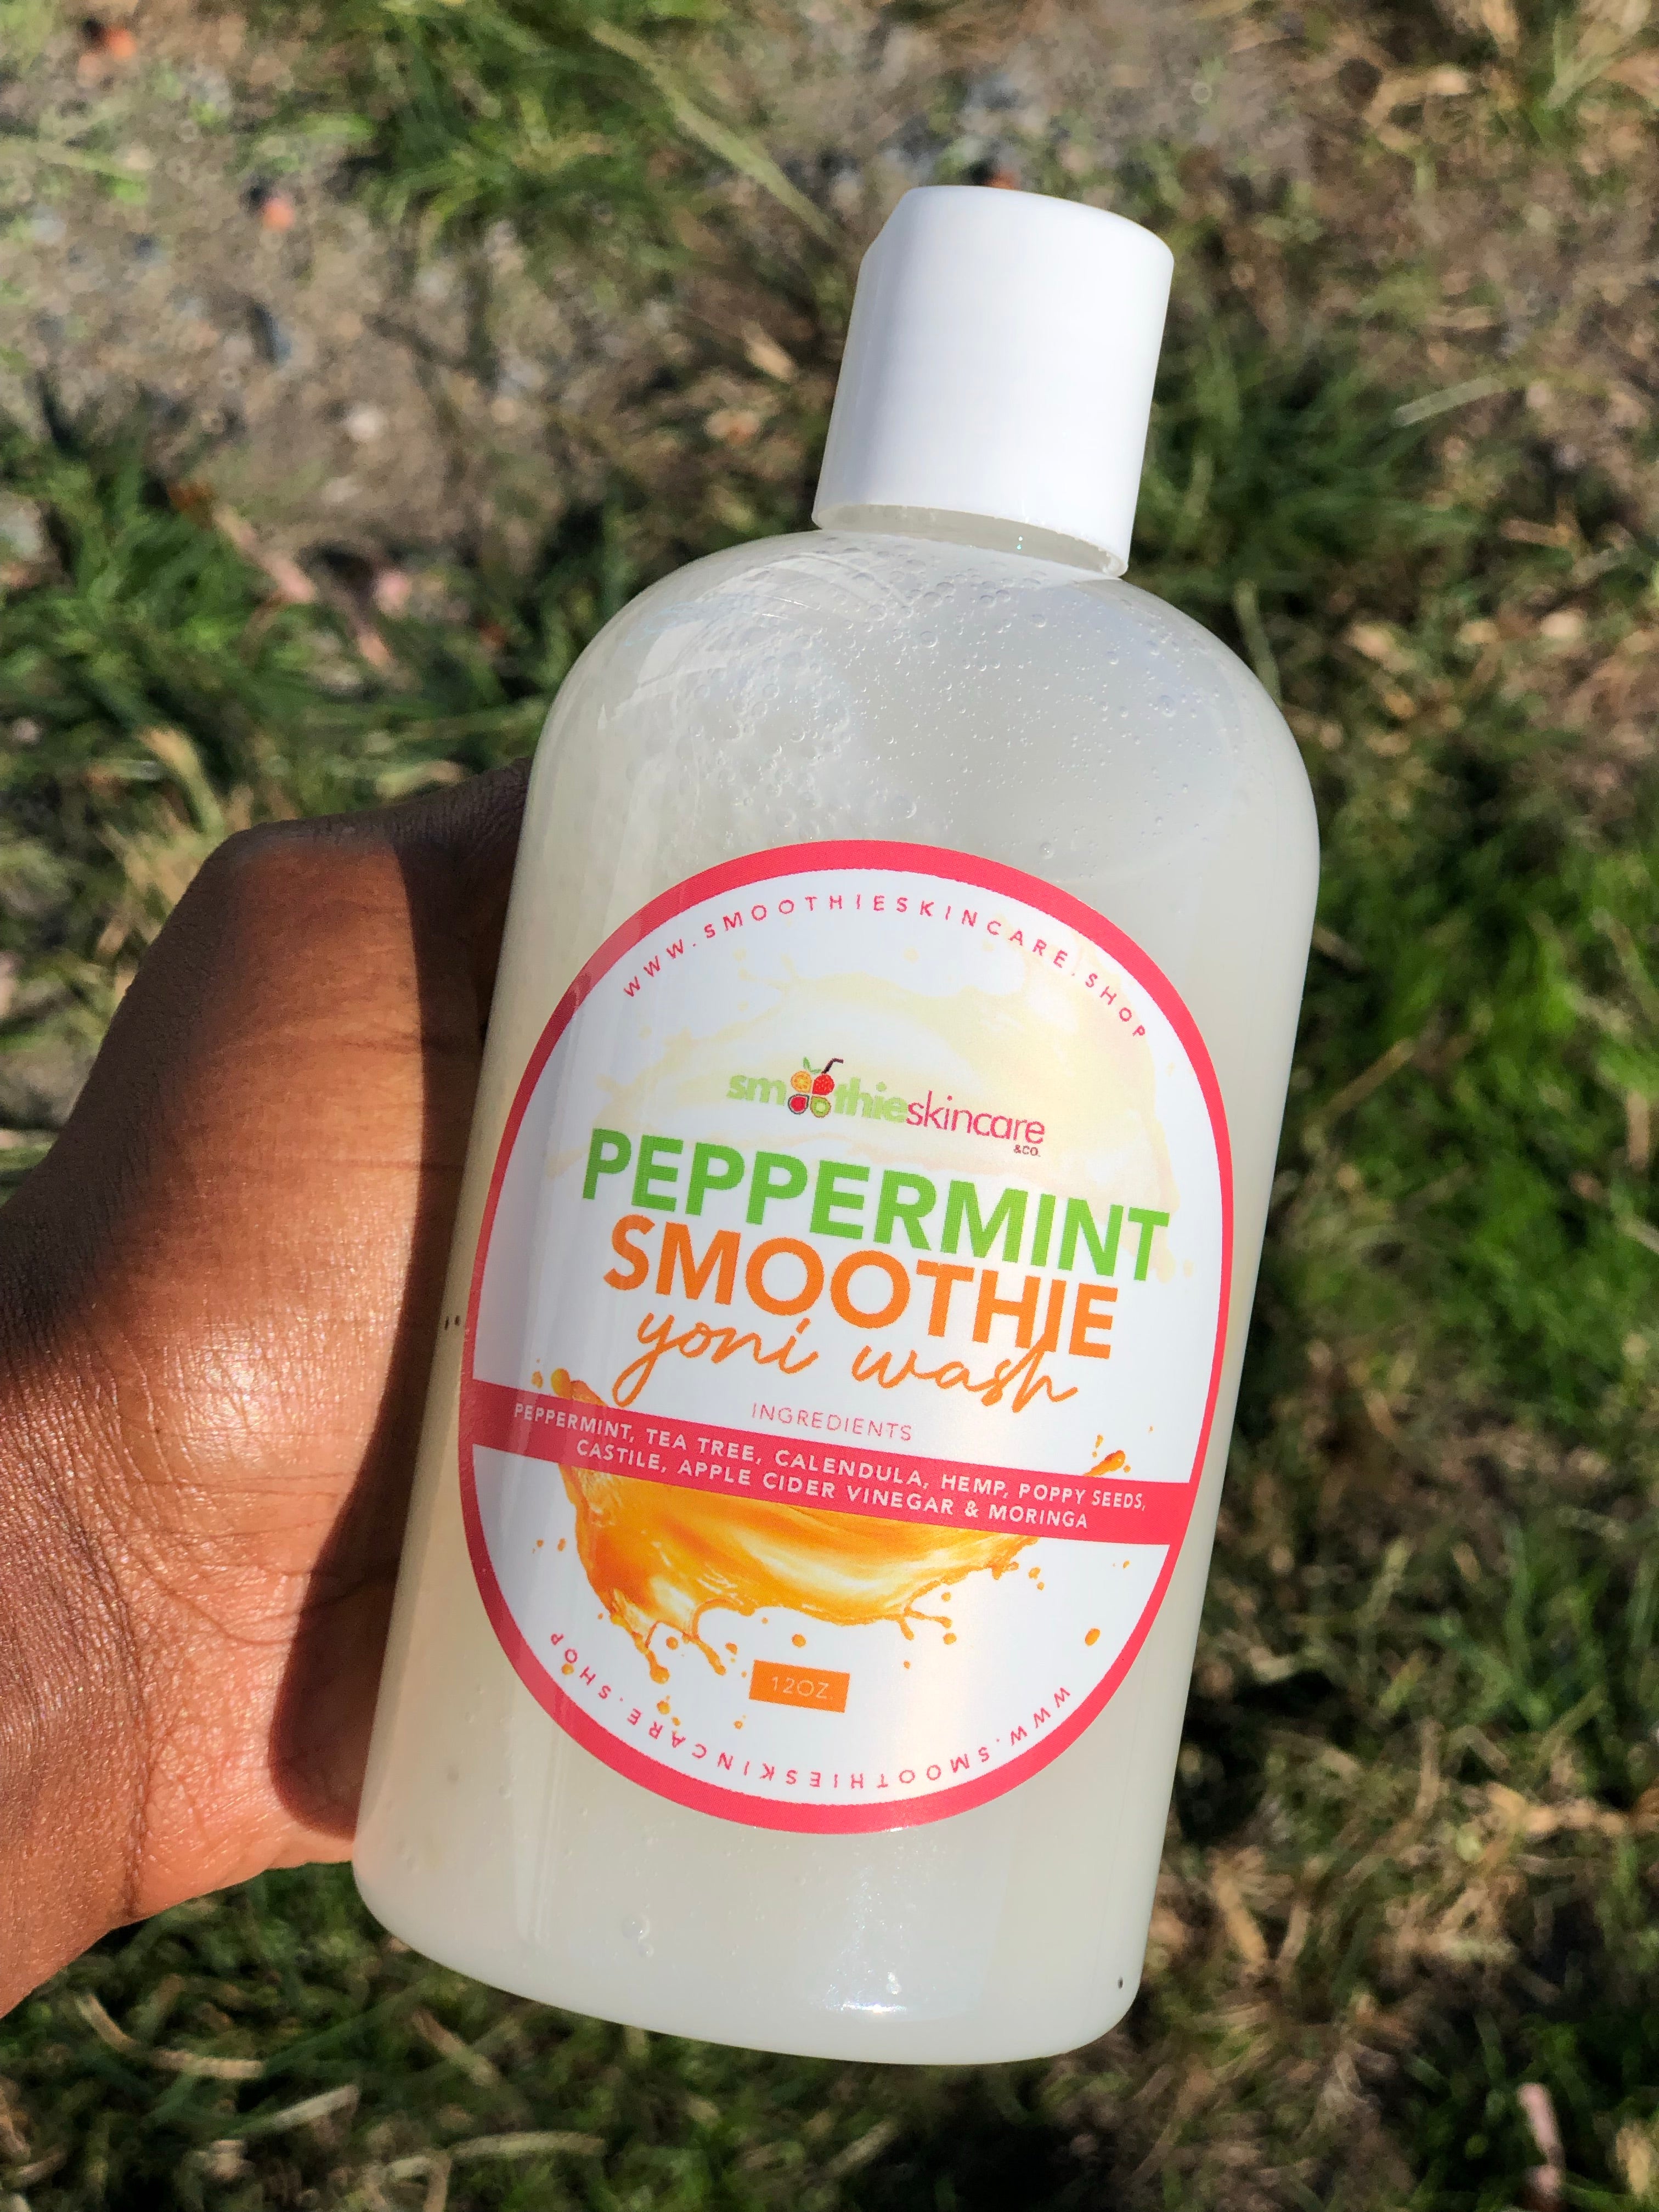 Peppermint Smoothie Yoni Wash